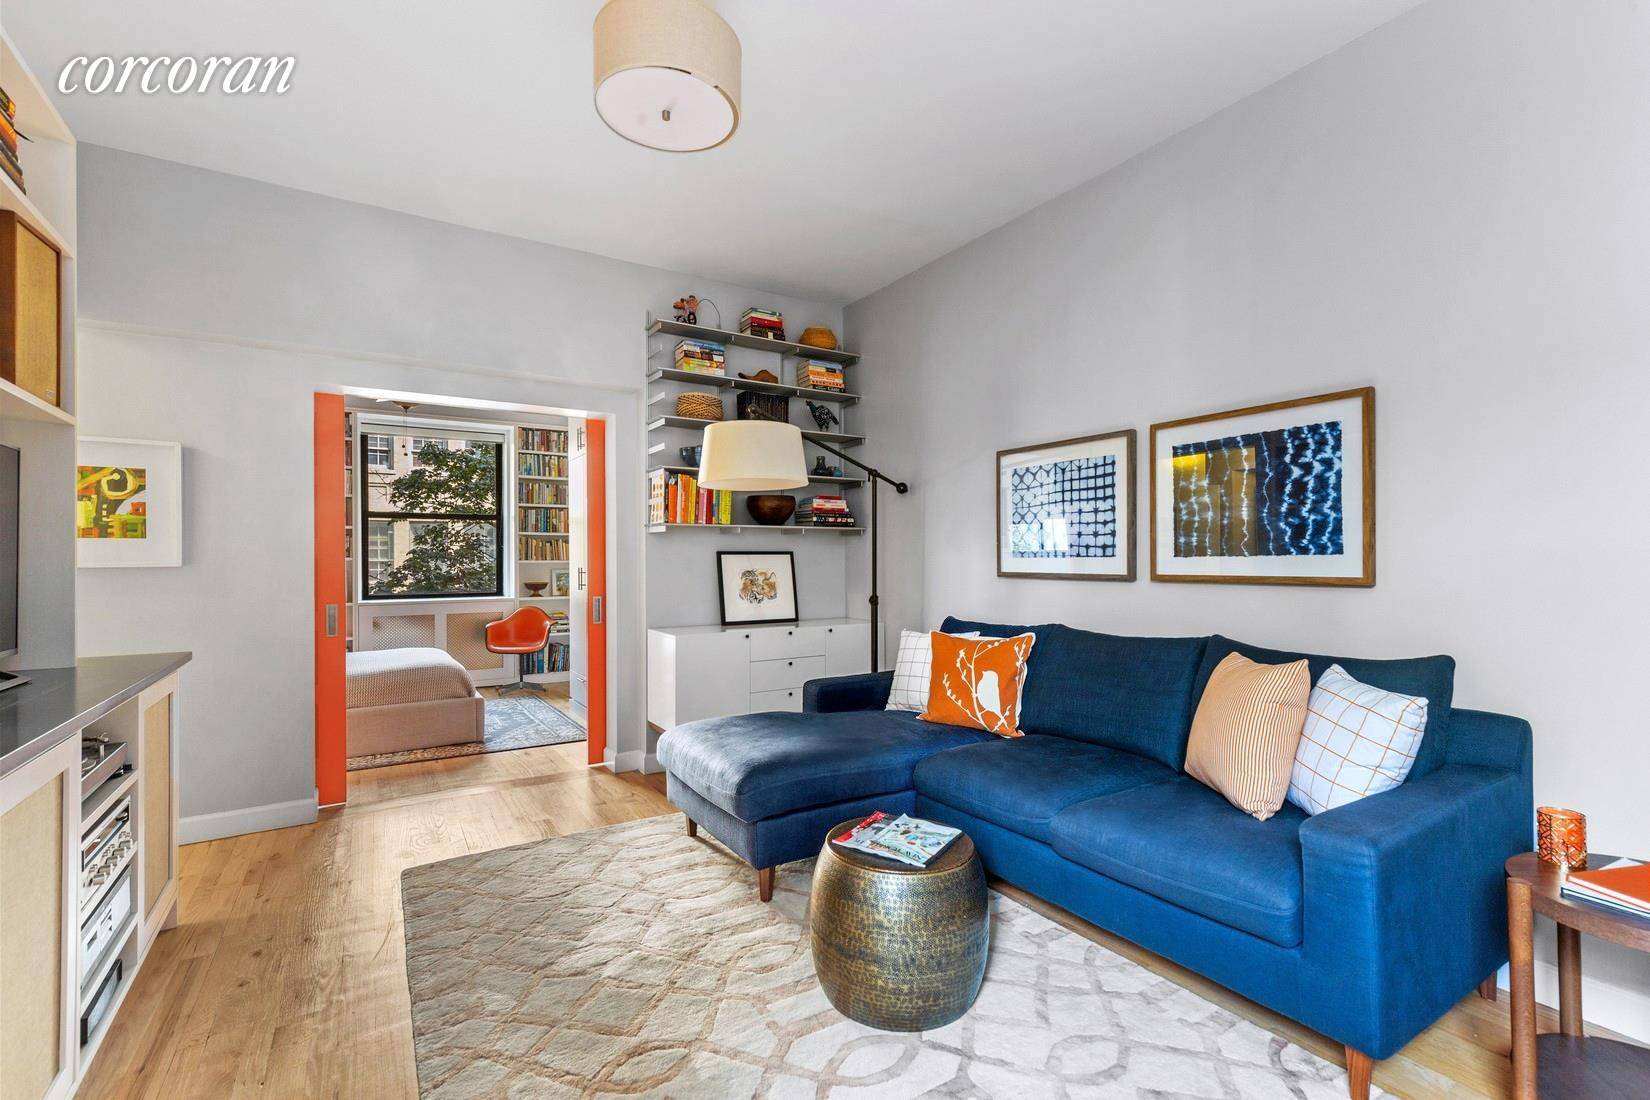 With perfect proportions, a renovated kitchen, an abundance of storage, an in unit washer dryer and not an ounce of wasted space, this beautifully designed two bedroom apartment at the ...